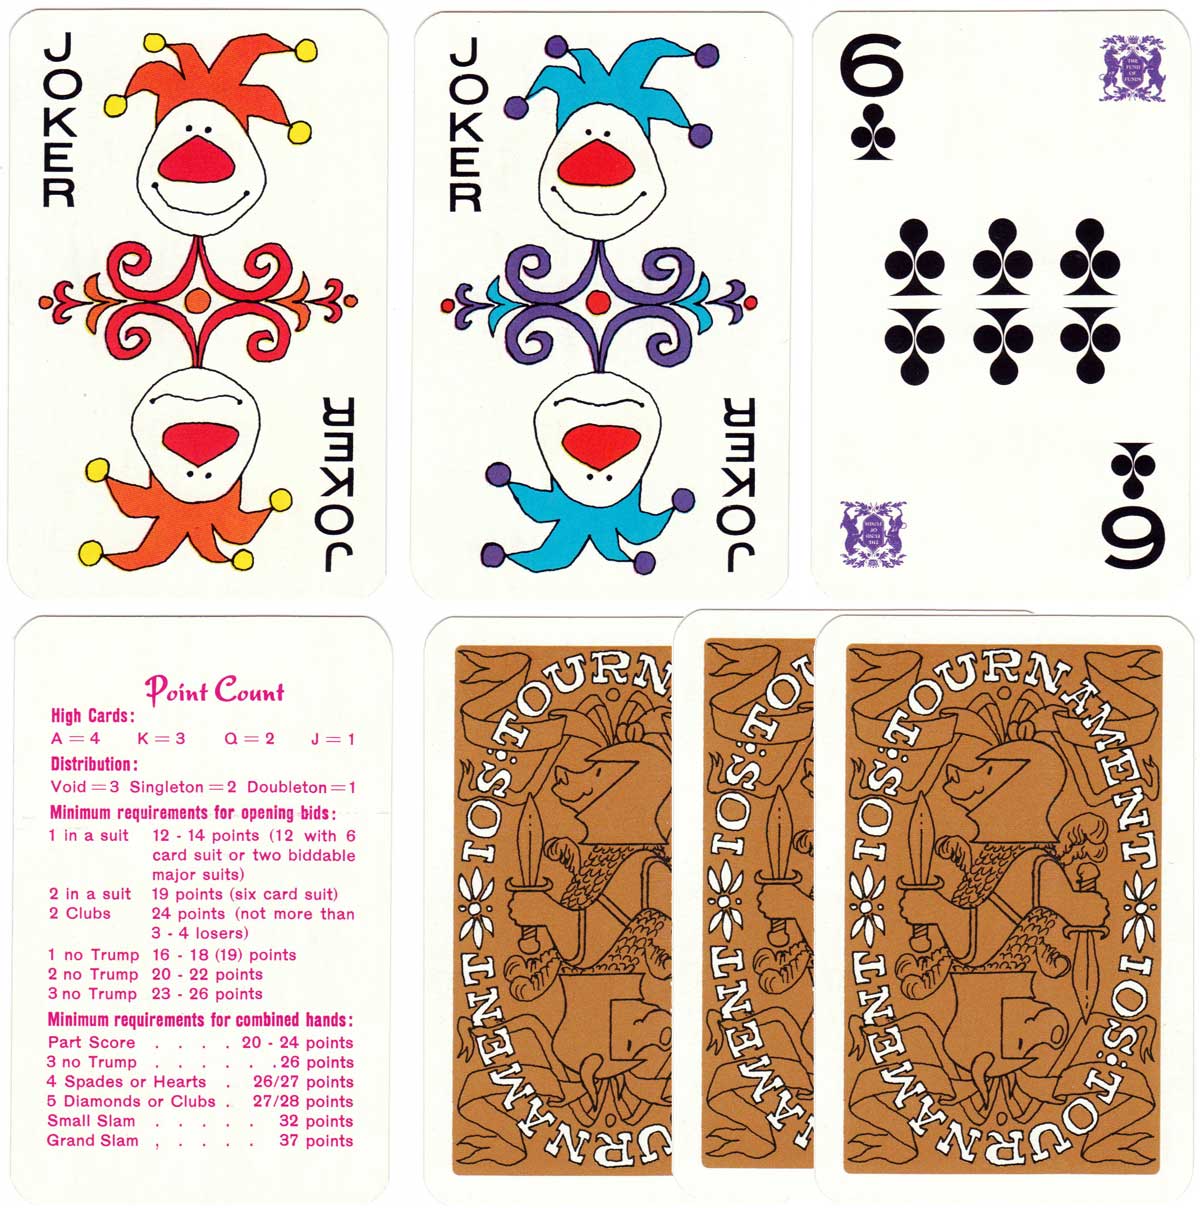 Investors Overseas Services, Ltd. (IOS) produced by A. G. Müller (Schaffhausen), c.1969